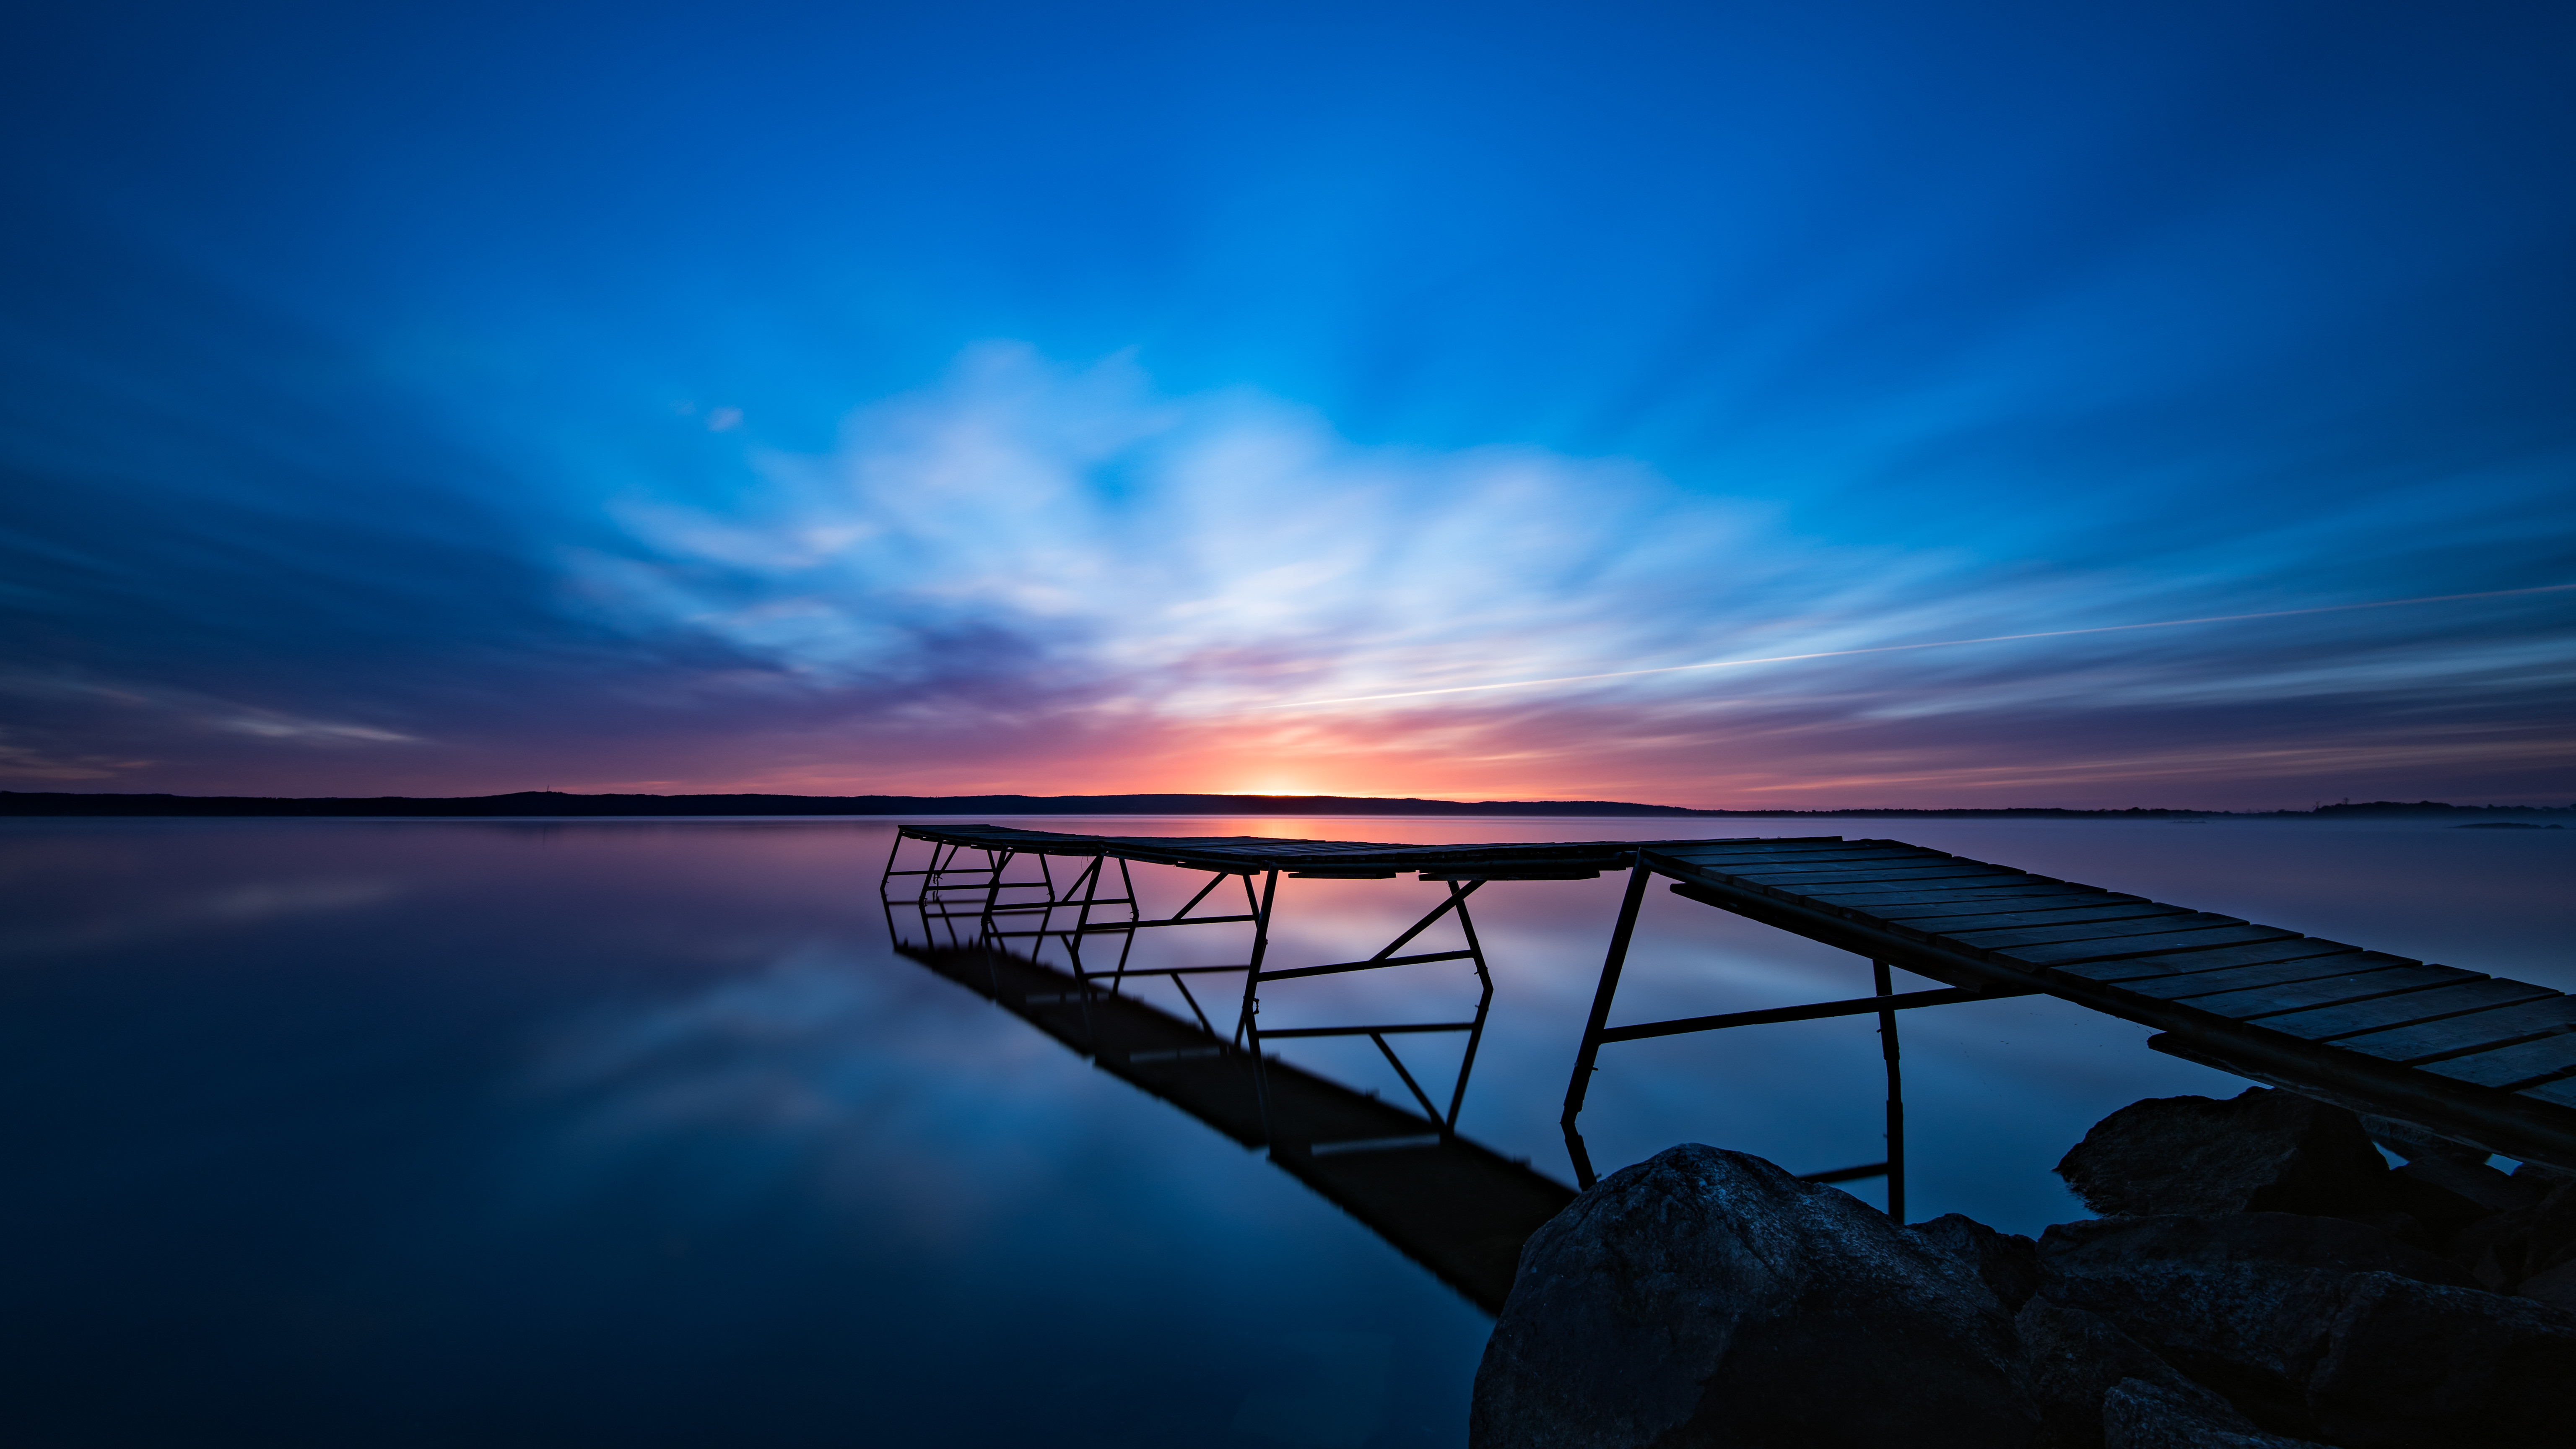 Sunrise Long Exposure Nature Water Sweden Linkoping Jetty Dock Clear Sky 6144x3456